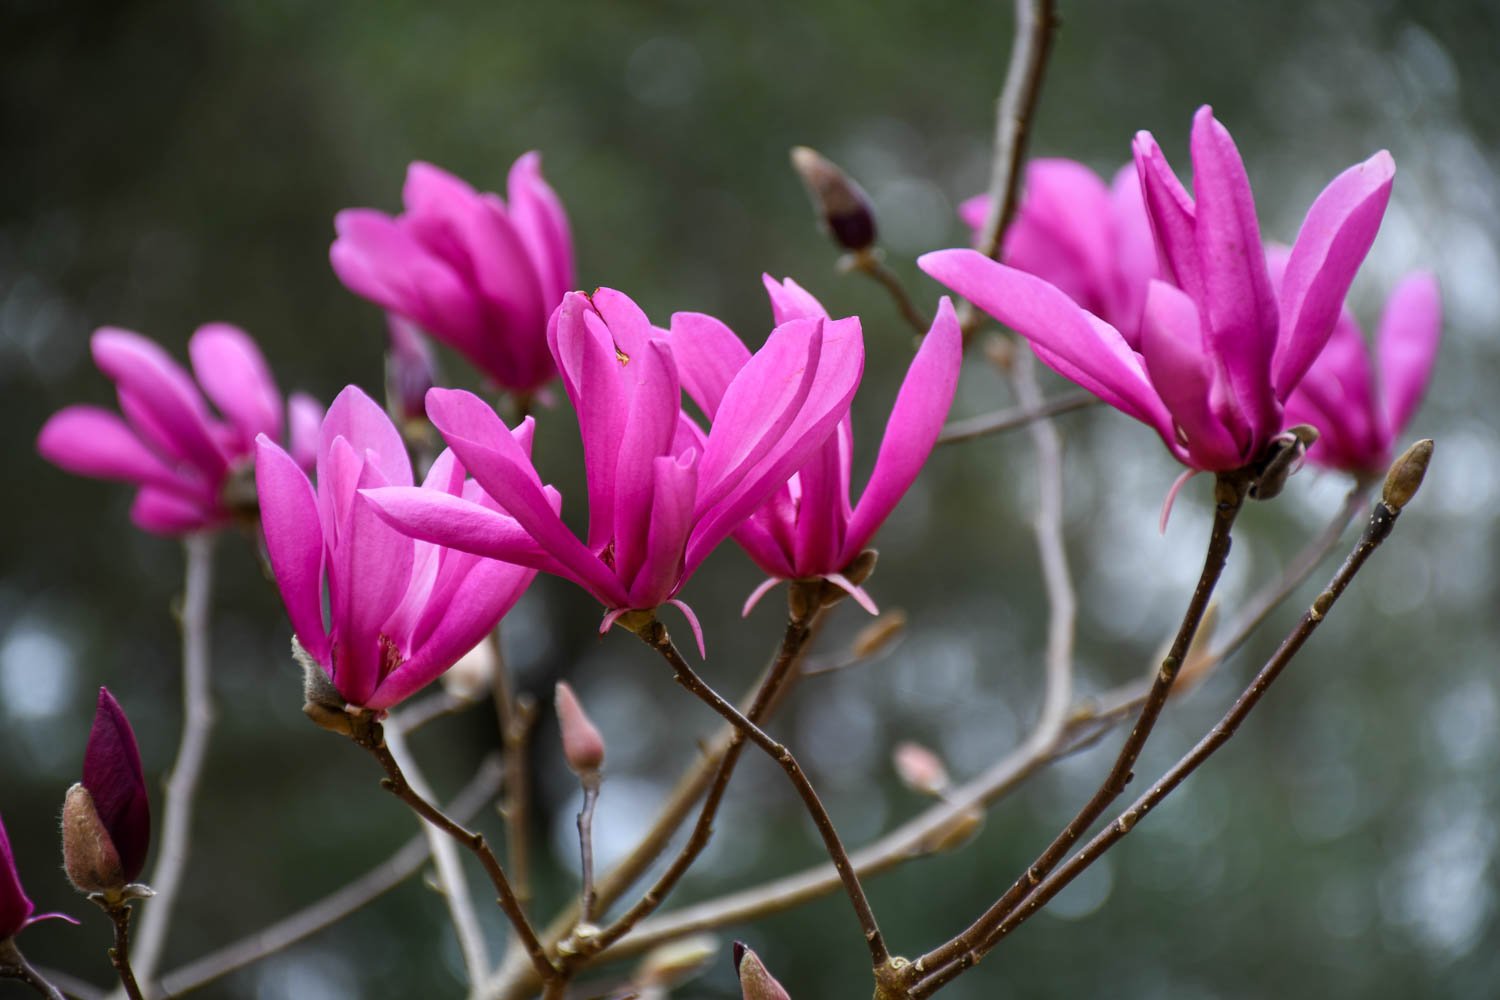 Magnolia 'Susan', Just One of the Girls